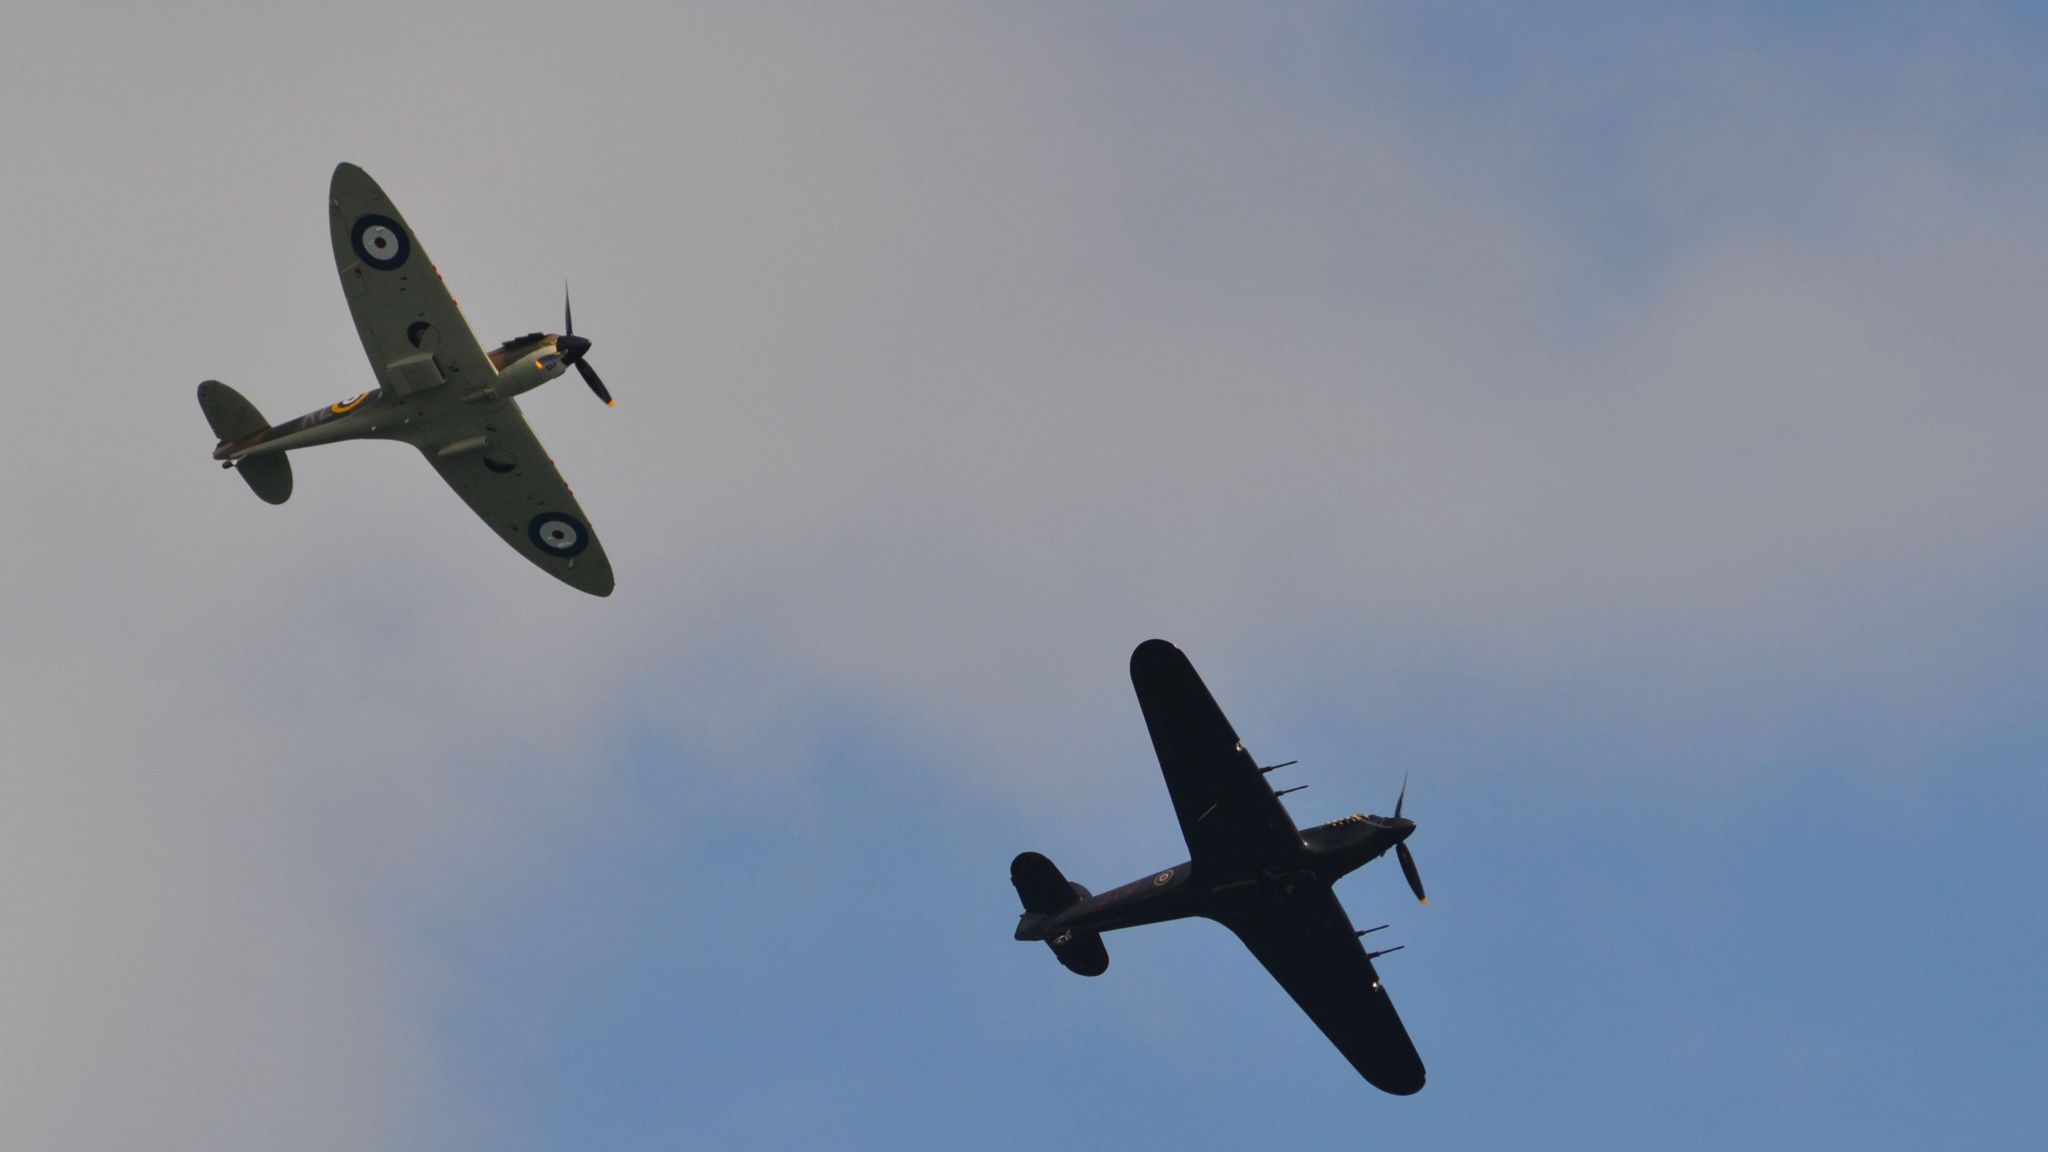 Spitfire and Hurricane at the Guernsey Air Display